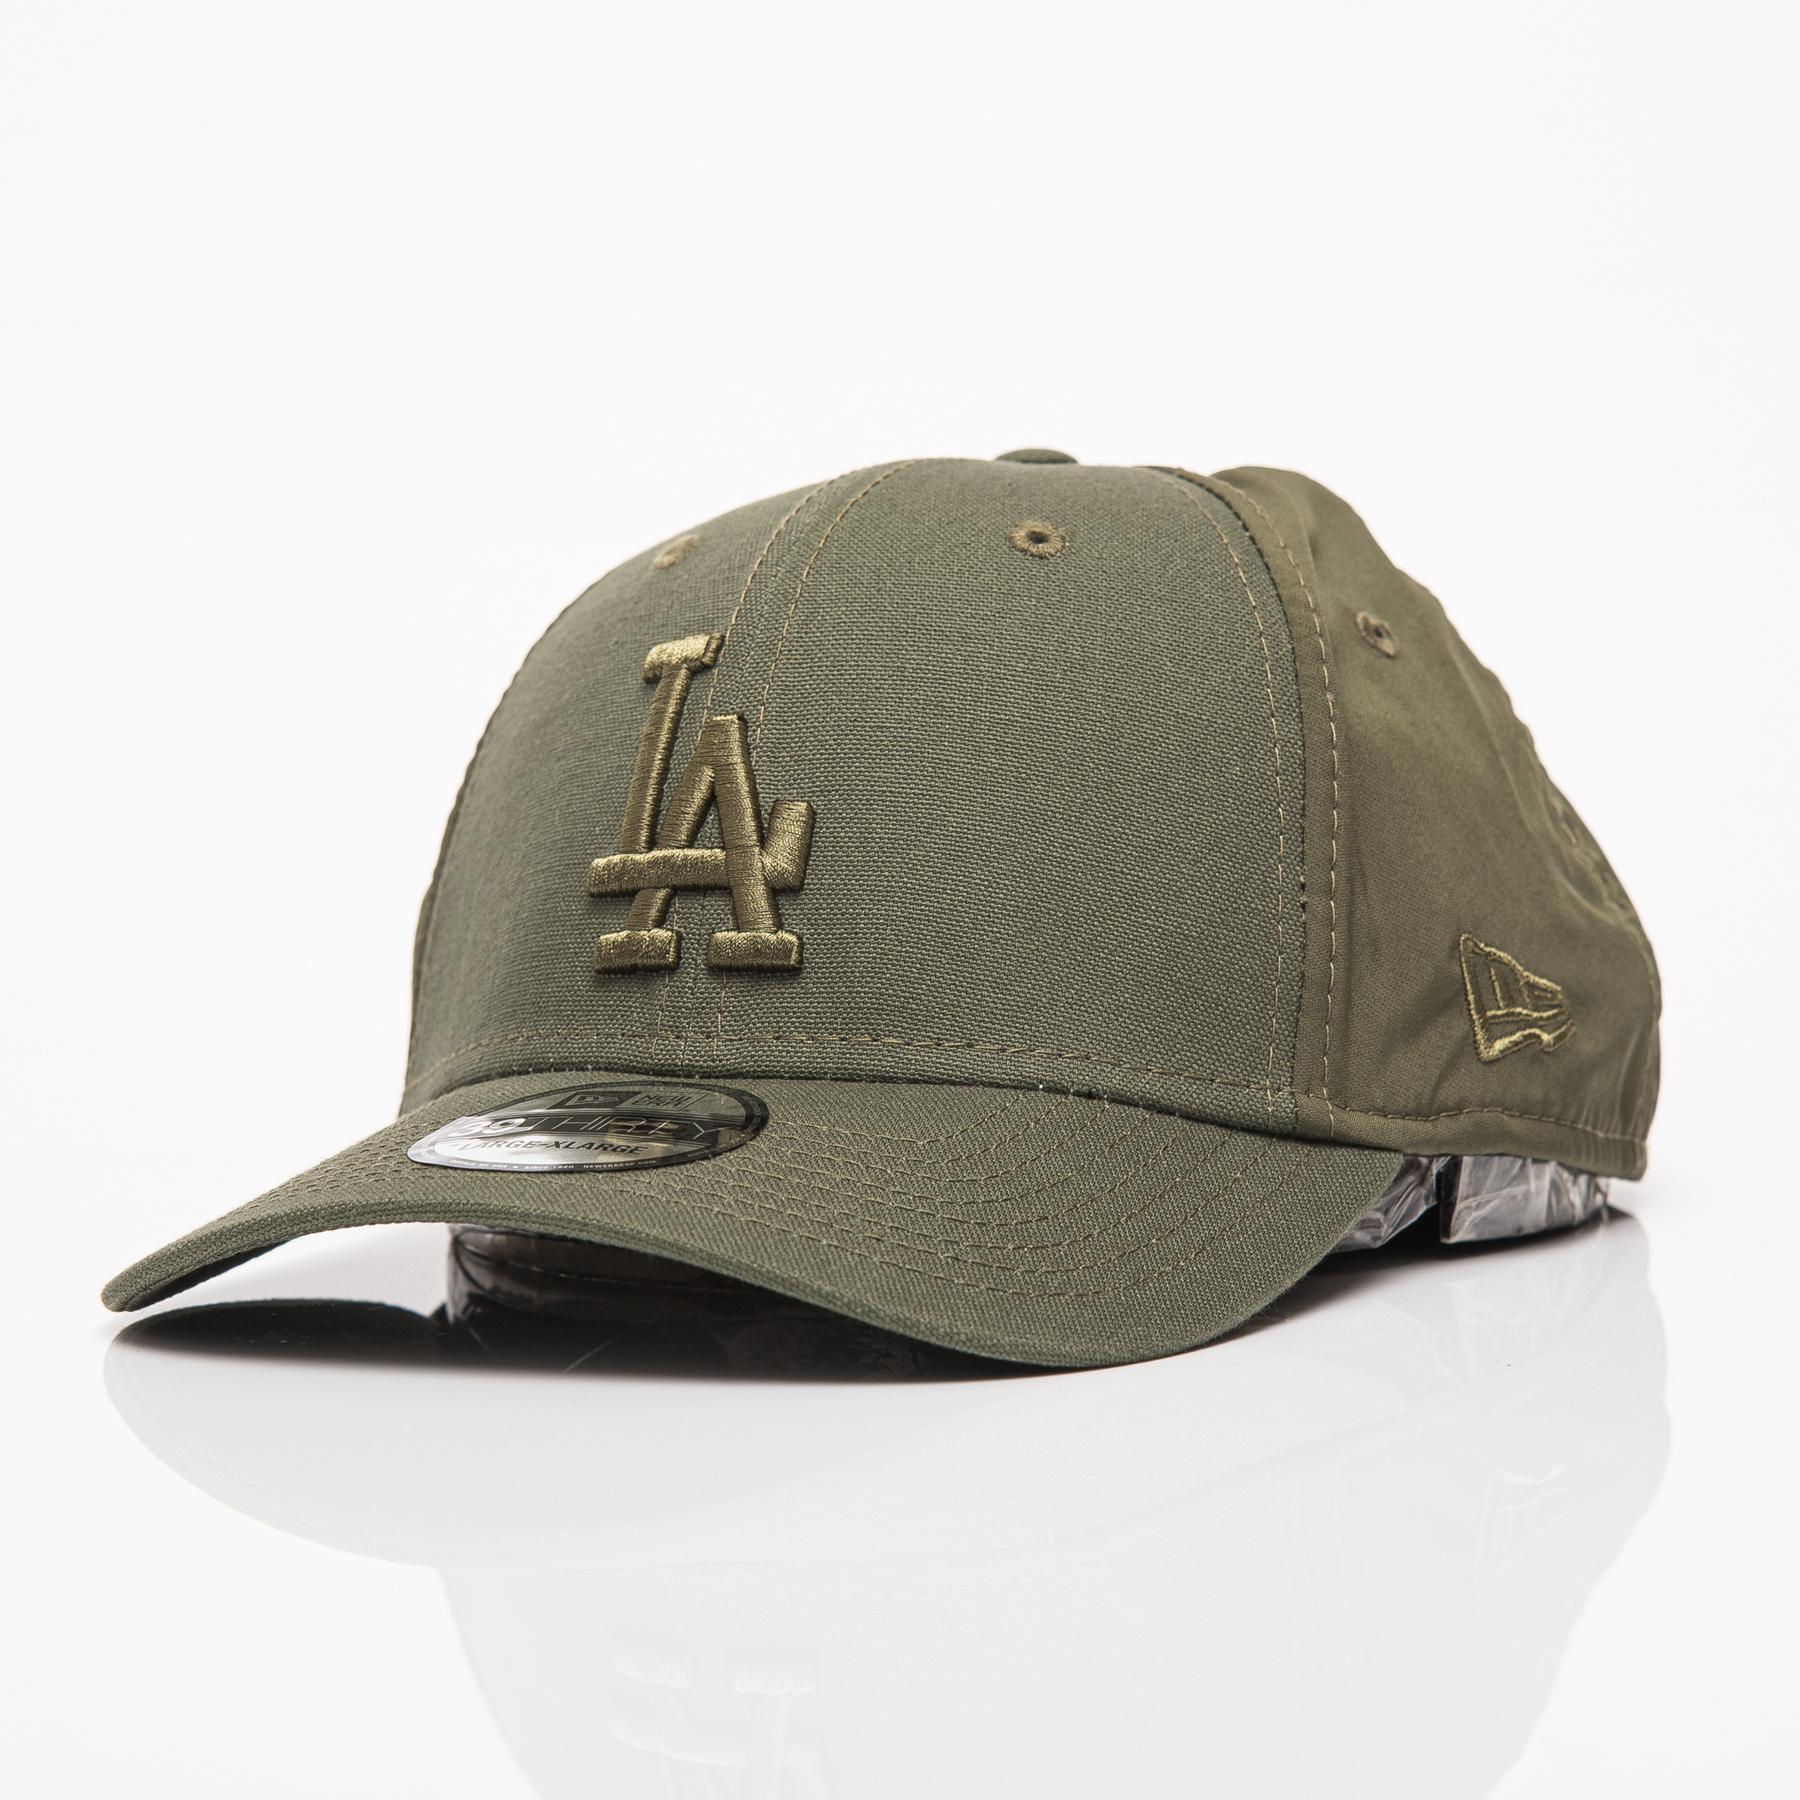 KTZ Los Angeles Dodgers Canvas 39thirty Cap in Green for Men Mens Accessories Hats 